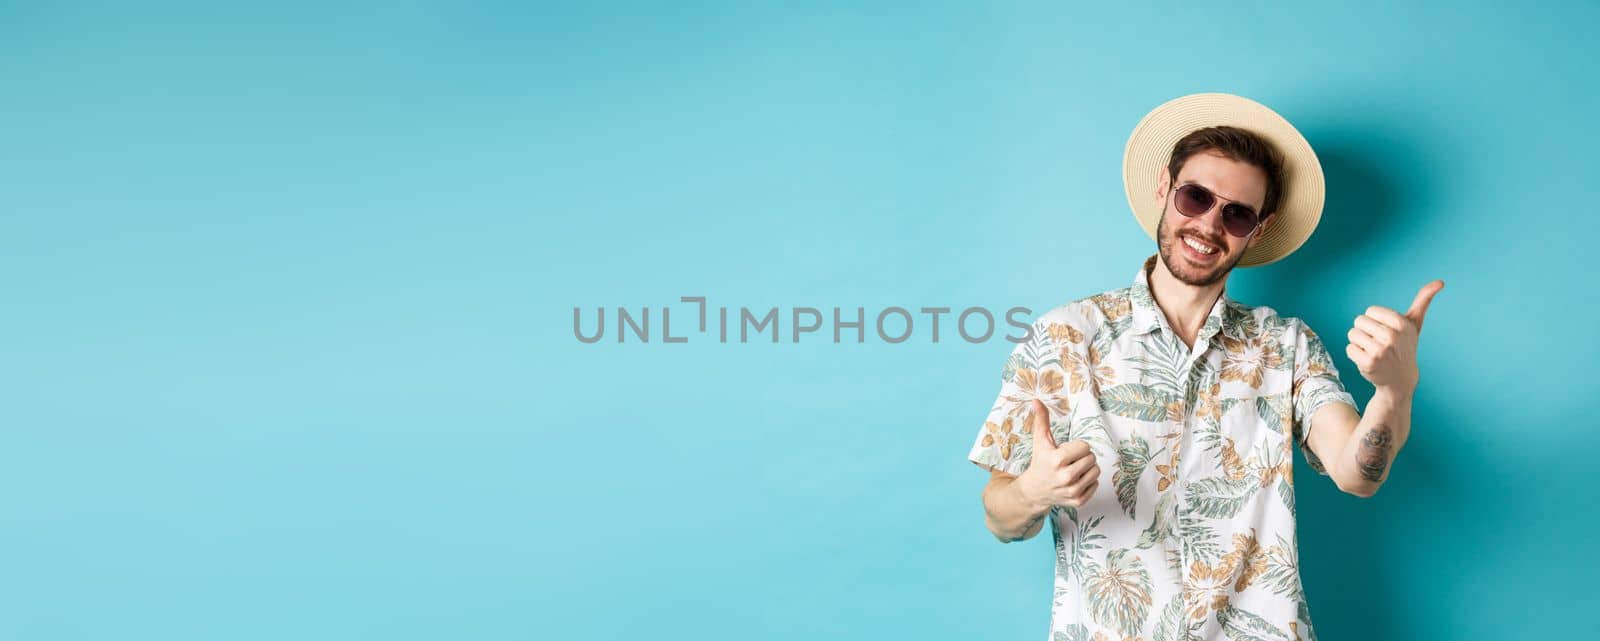 Cheerful tourist having fun summer holidays, showing thumbs up and smiling, standing in hawaiian shirt and sunglasses on blue background.